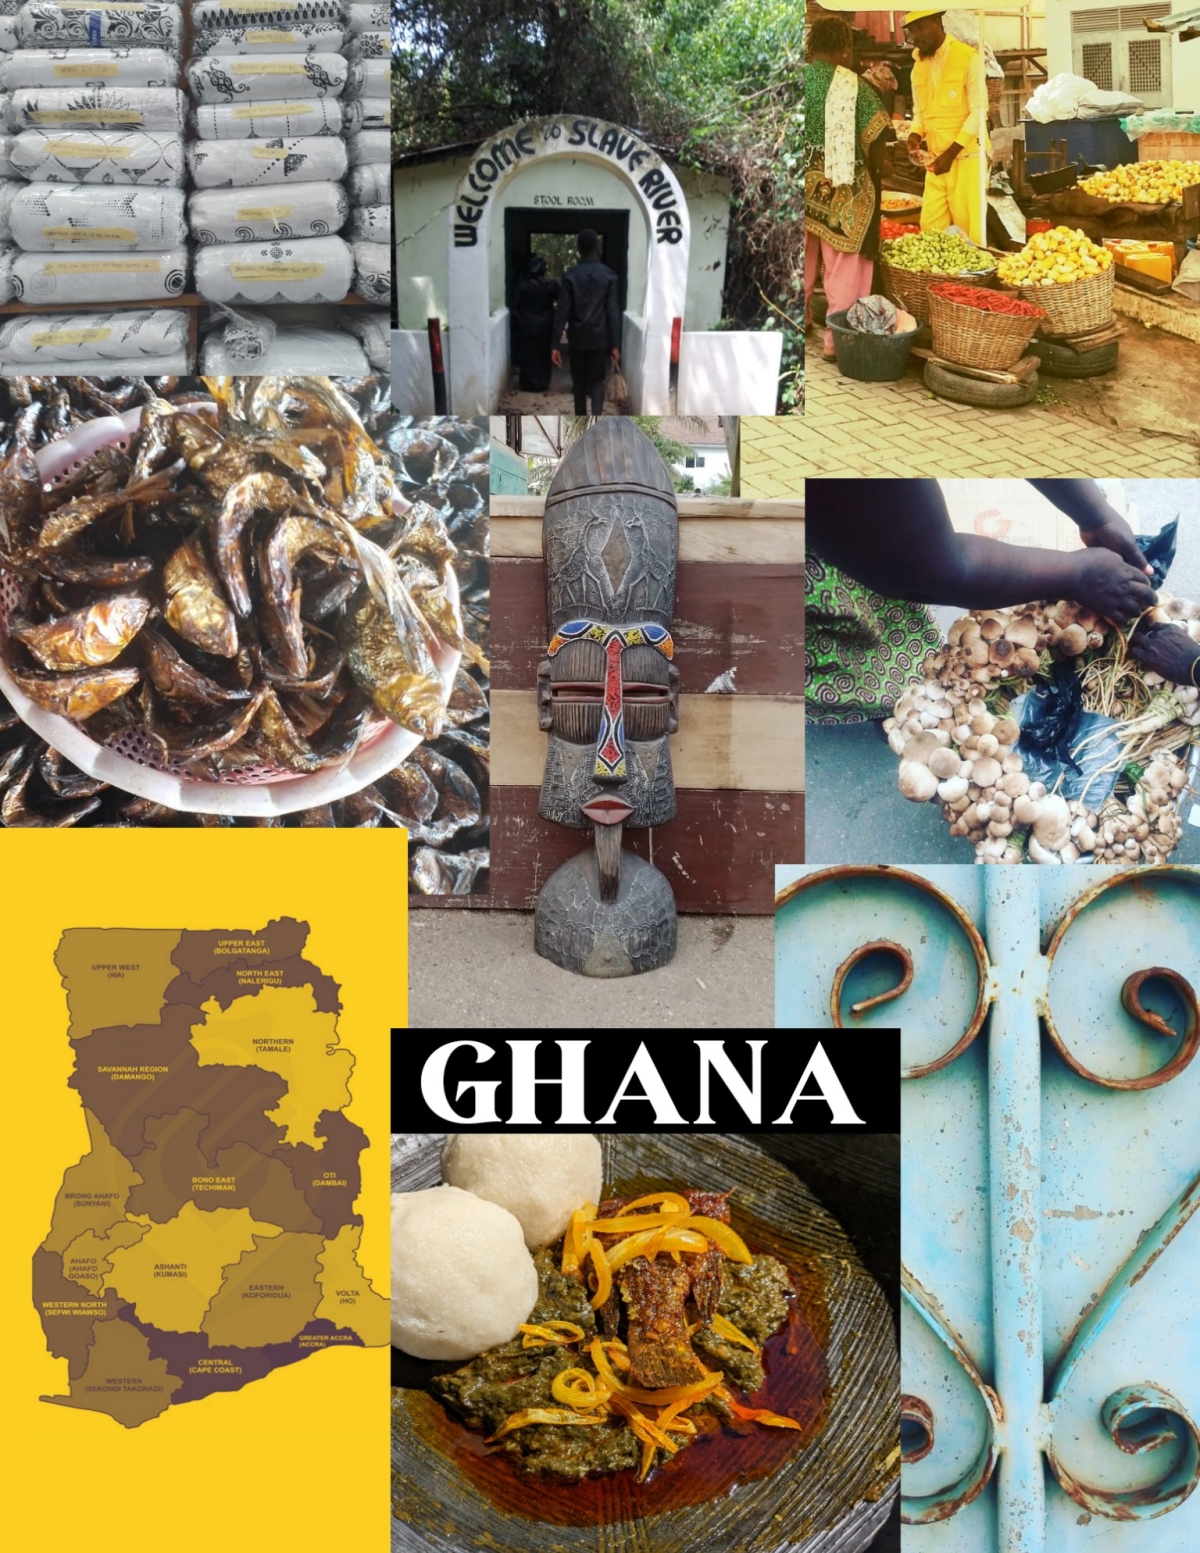 Collage depicting West African & Ghana culture showing traditional dishes, ingredients, a map, local art, and destinations.